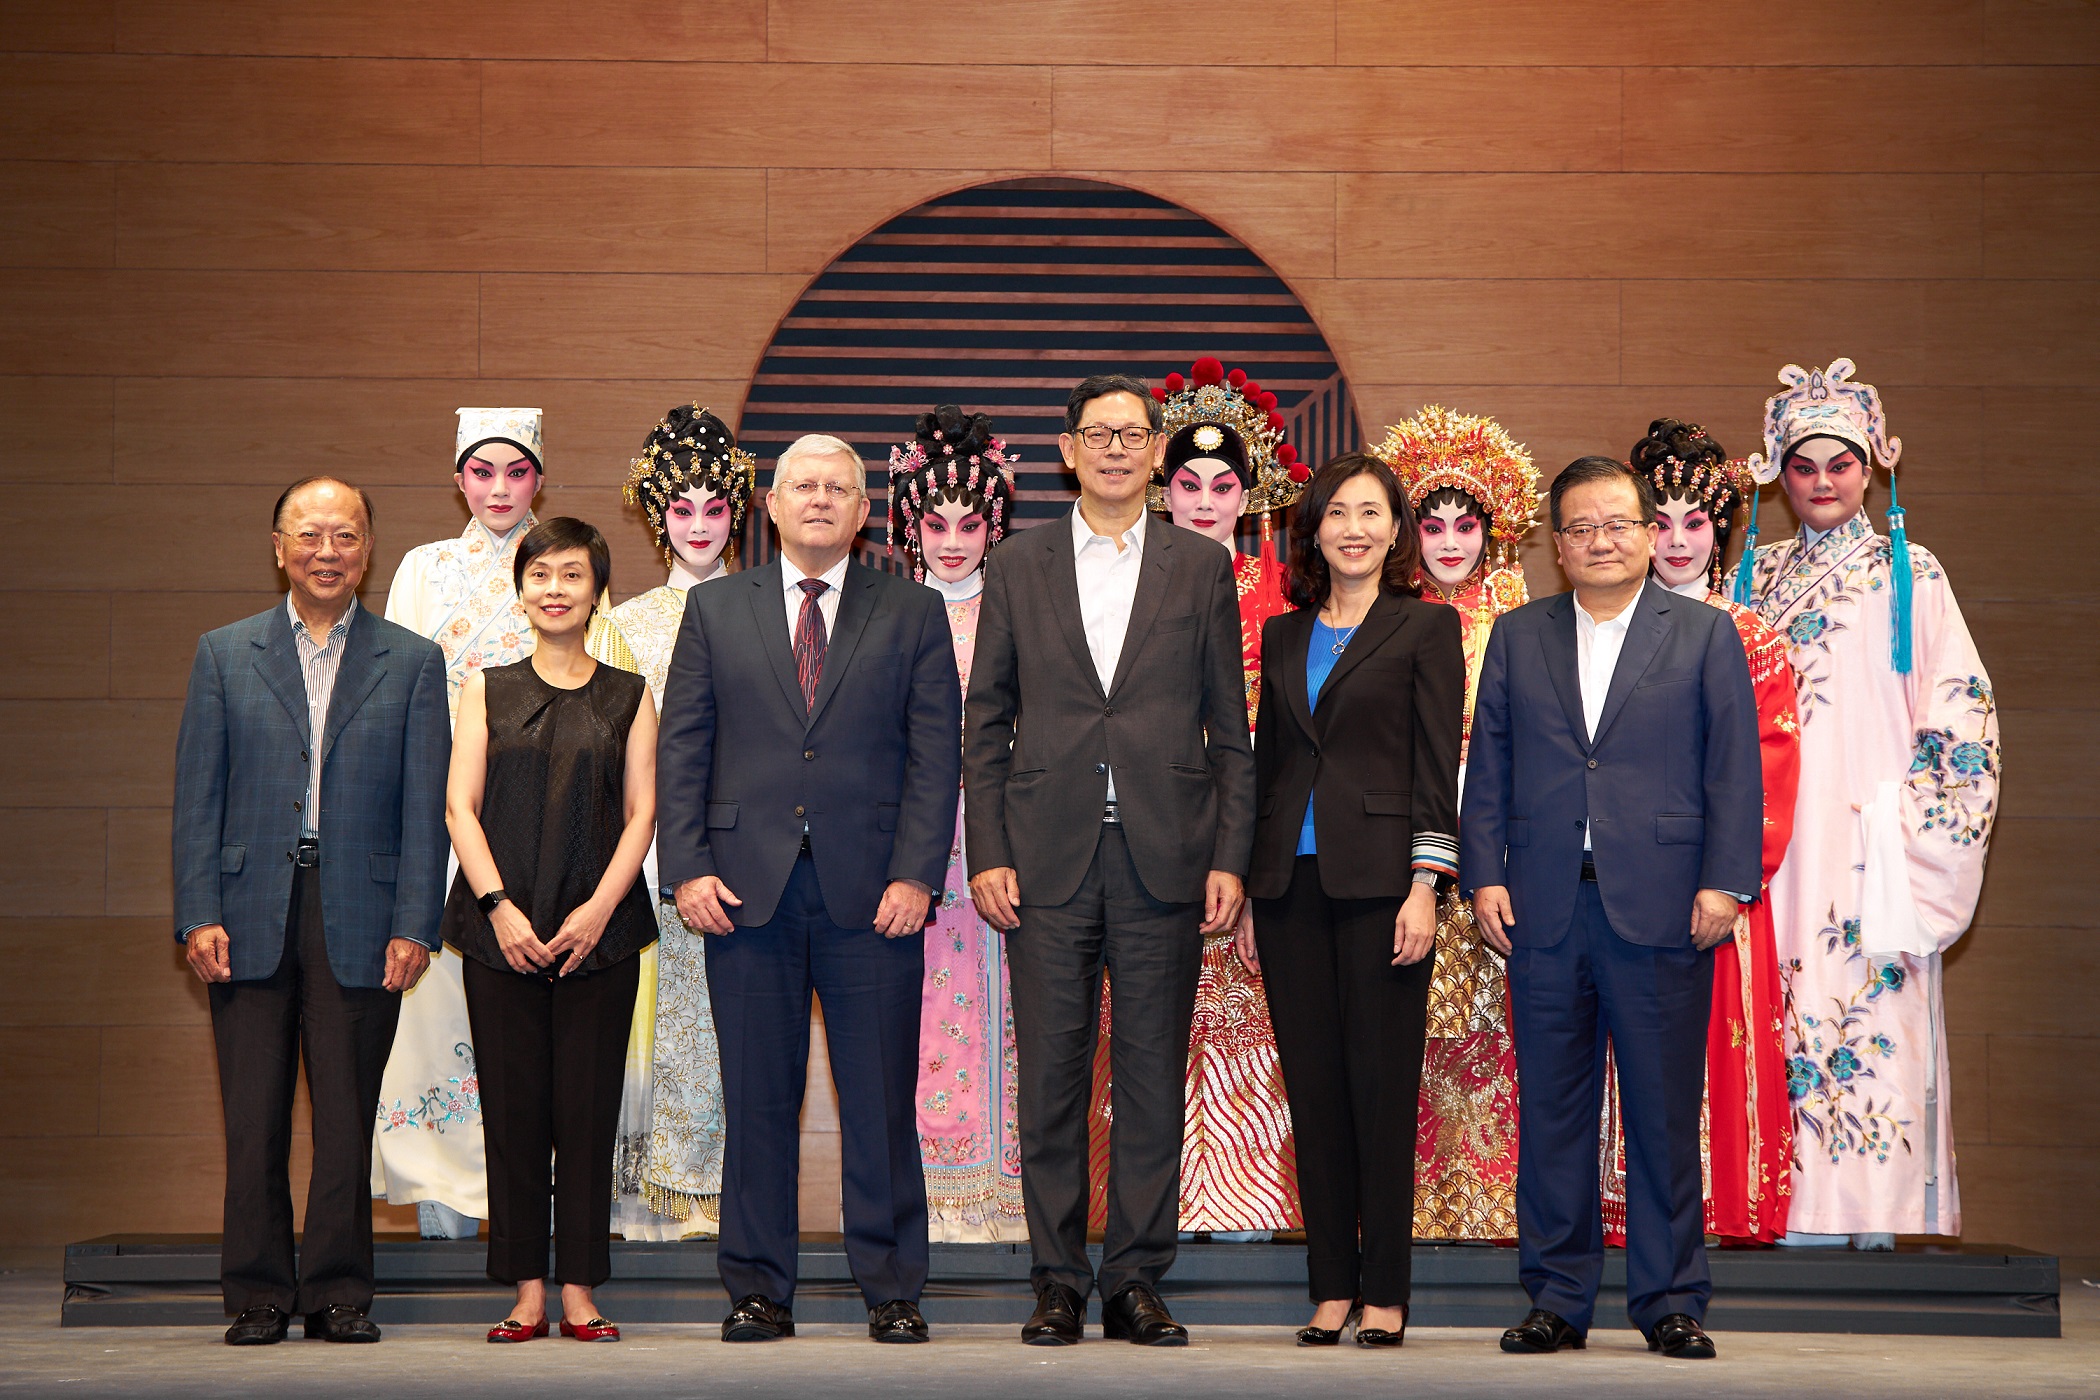 The Chief Executive of the HKMA, Mr Norman Chan, attends the publicity event on the 2018 Series HK$100 notes together with representatives from the West Kowloon Cultural District Authority, the three note-issuing banks, the Cantonese opera industry and the Tea House Rising Stars Troupe.